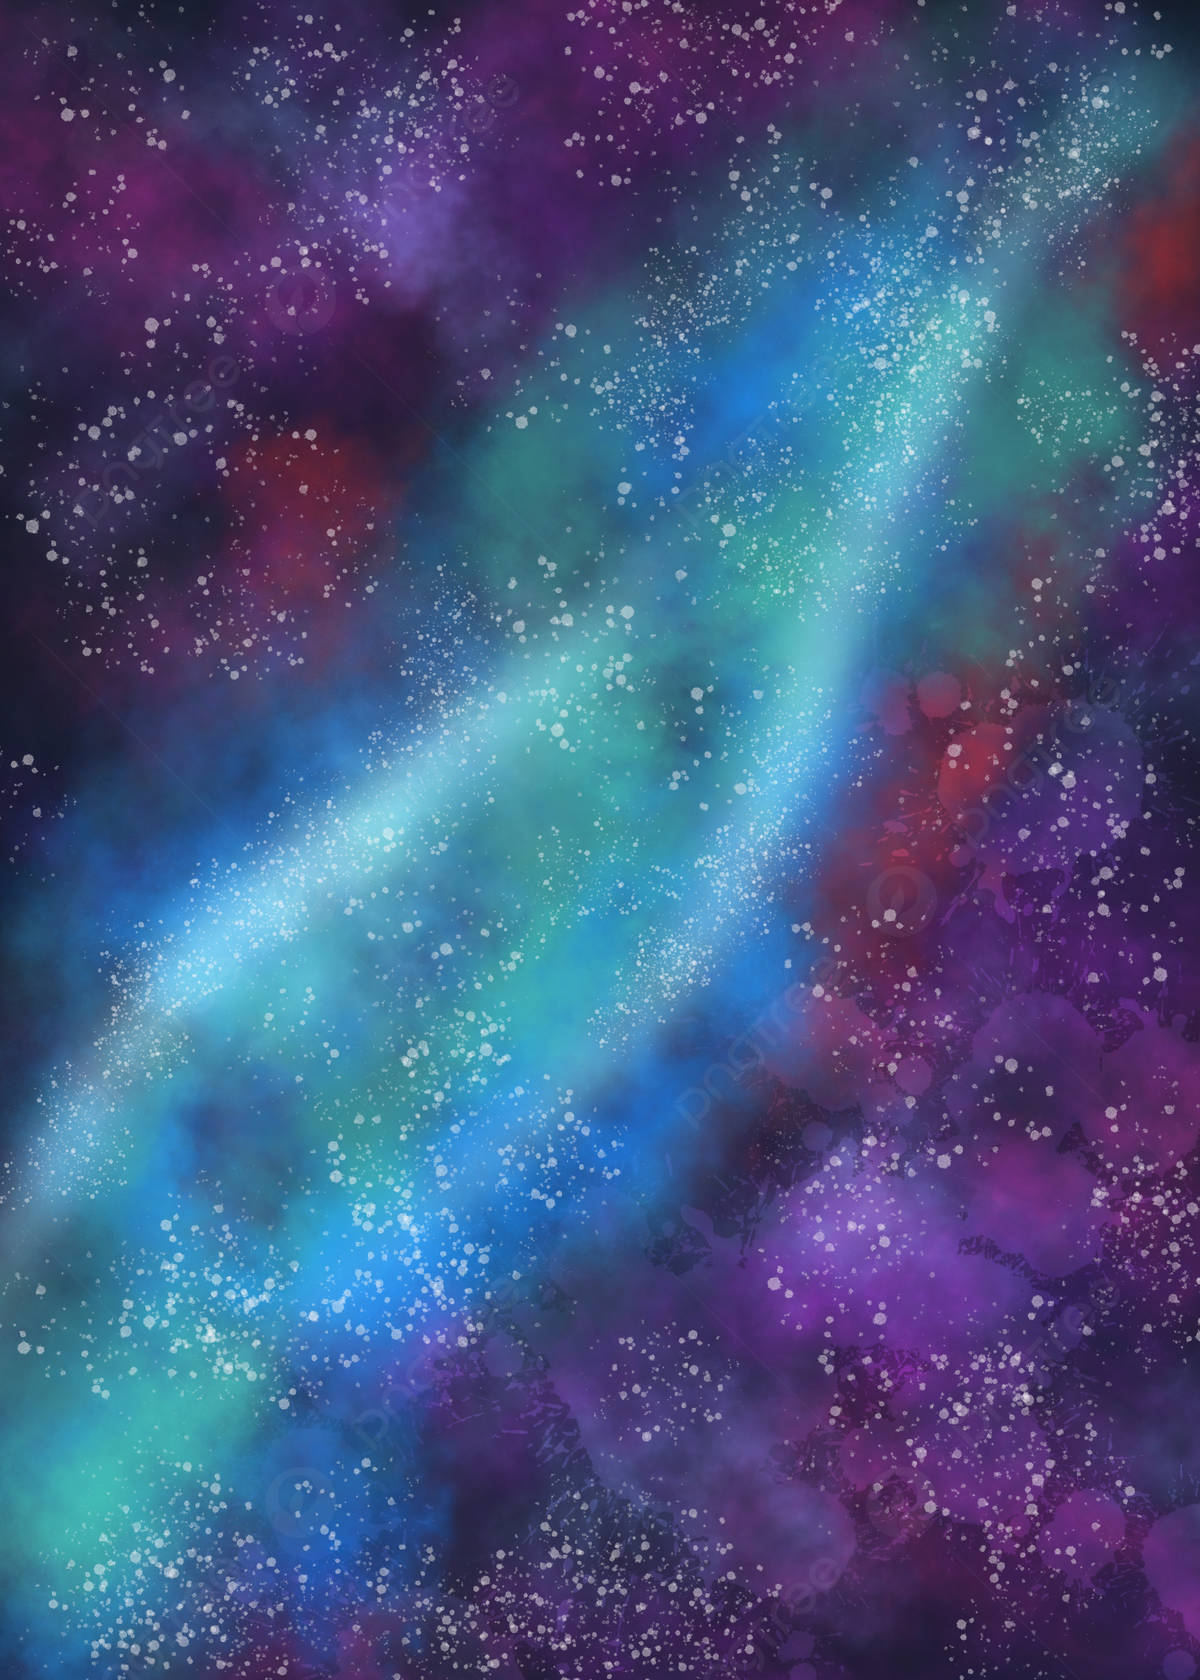 Universal Colors In Space Up-Close Wallpaper